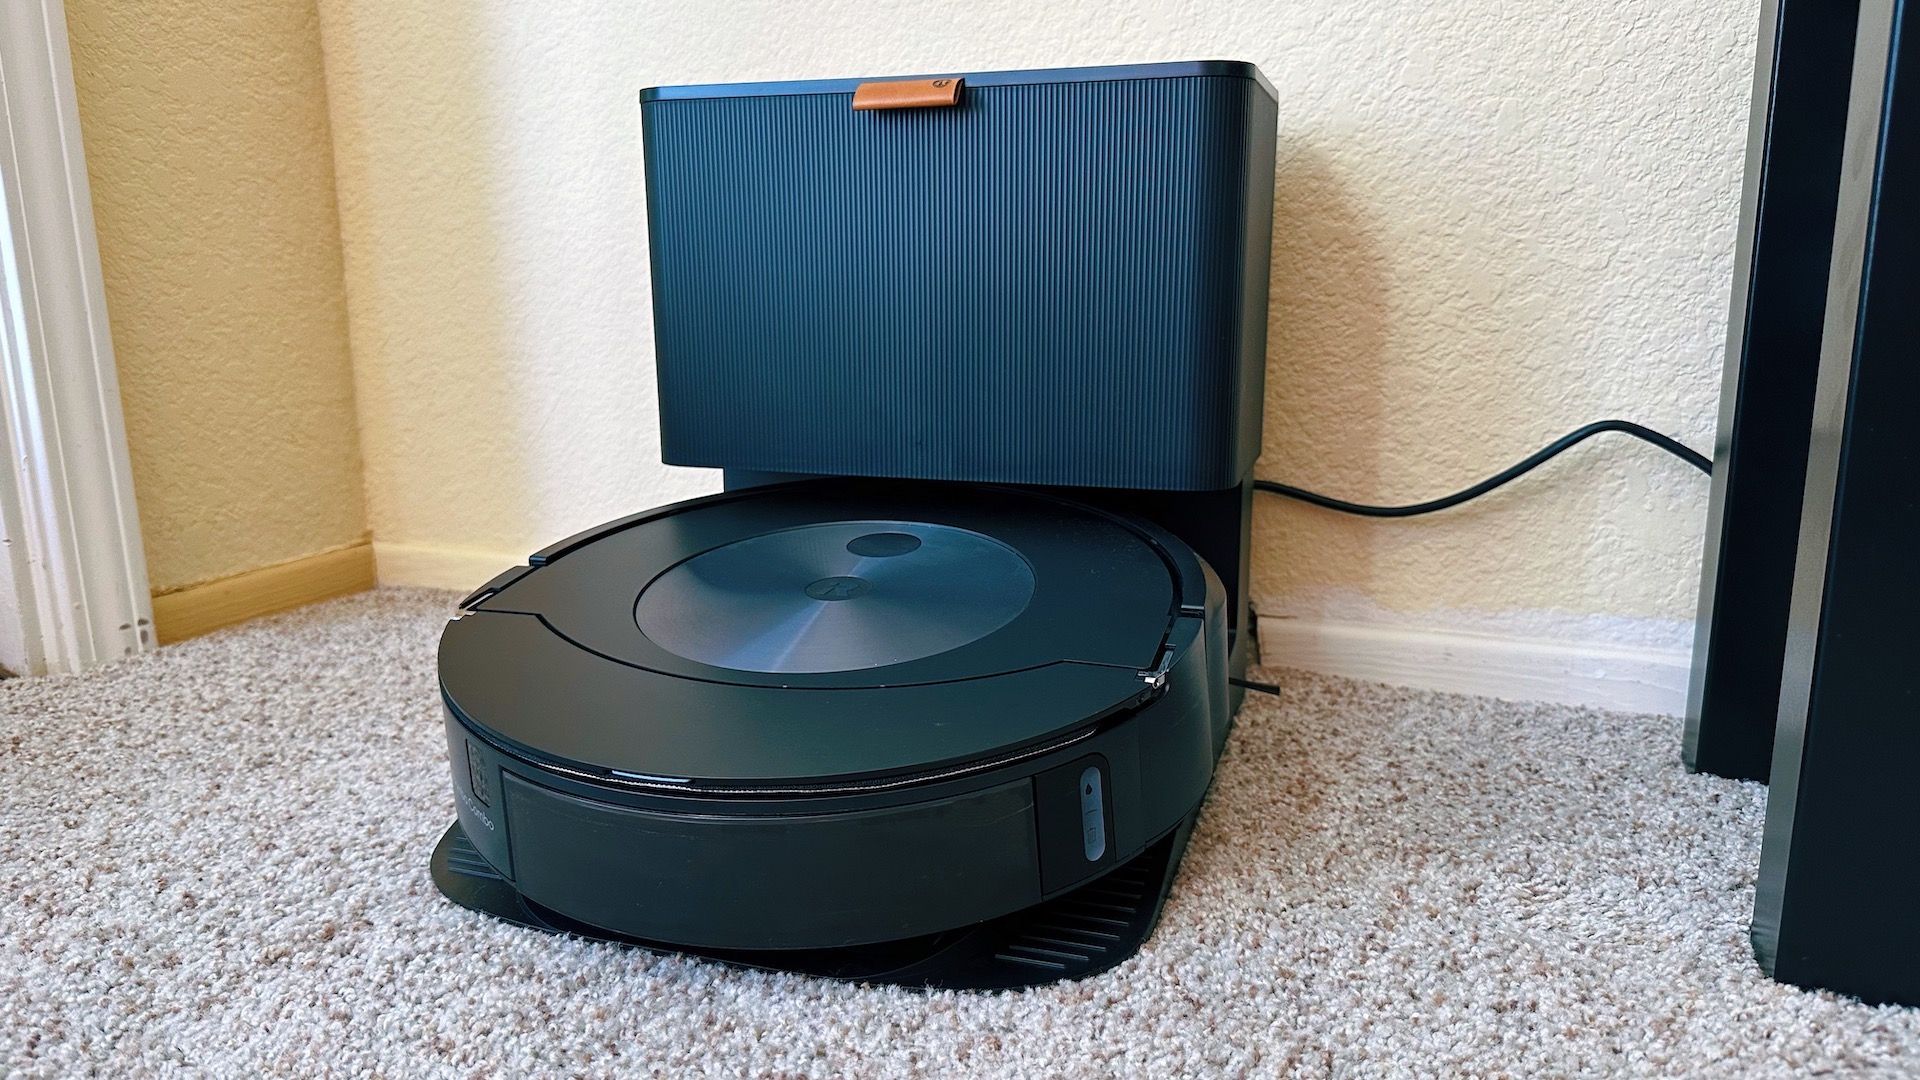 Roomba j7+ vacuum sitting in its docking station